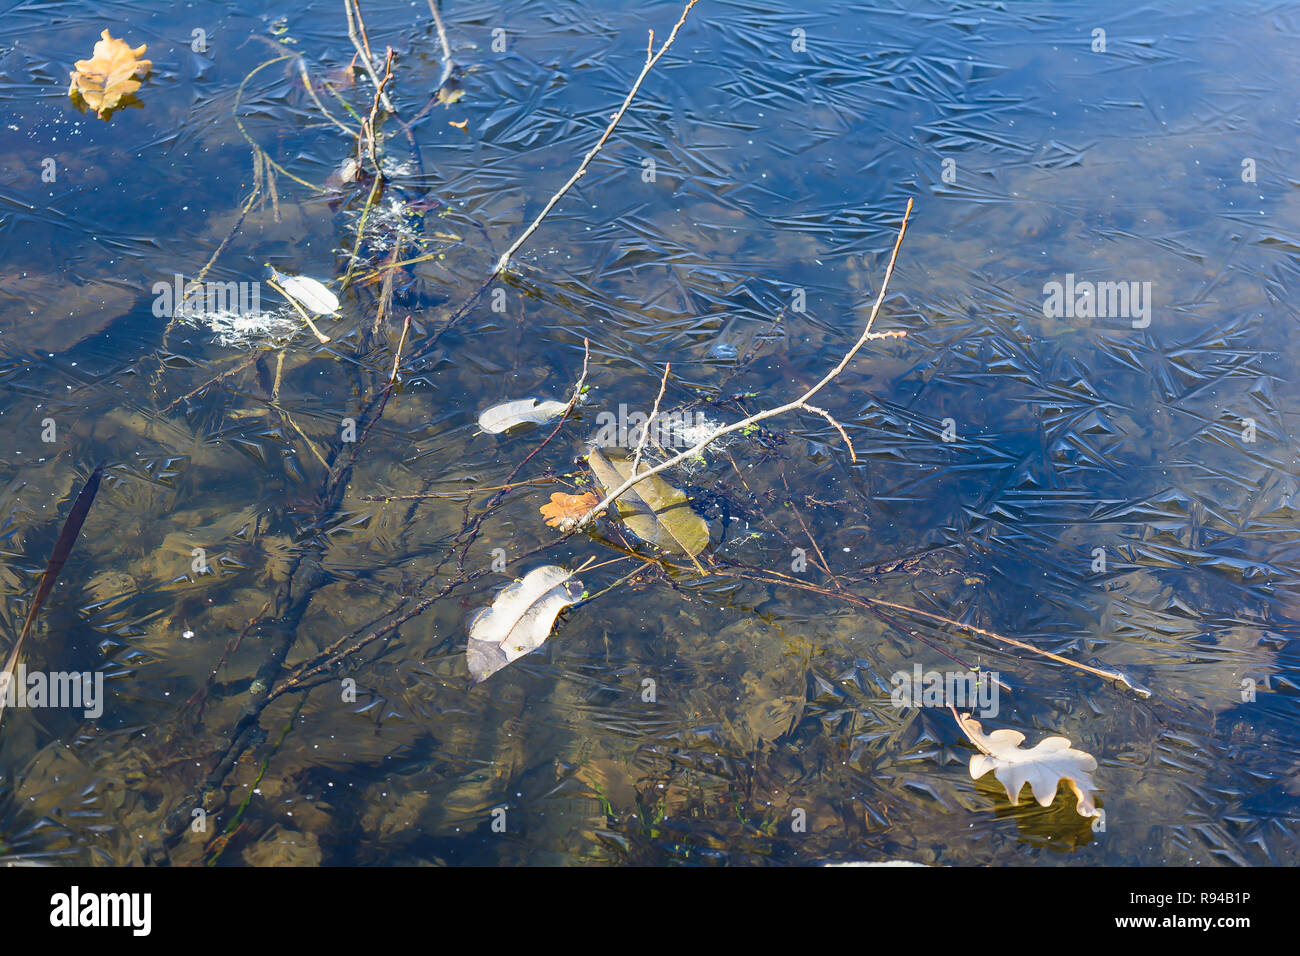 First frost, Frozen Pond, Frozen River, Late Autumn, Thin Ice Stock Photo